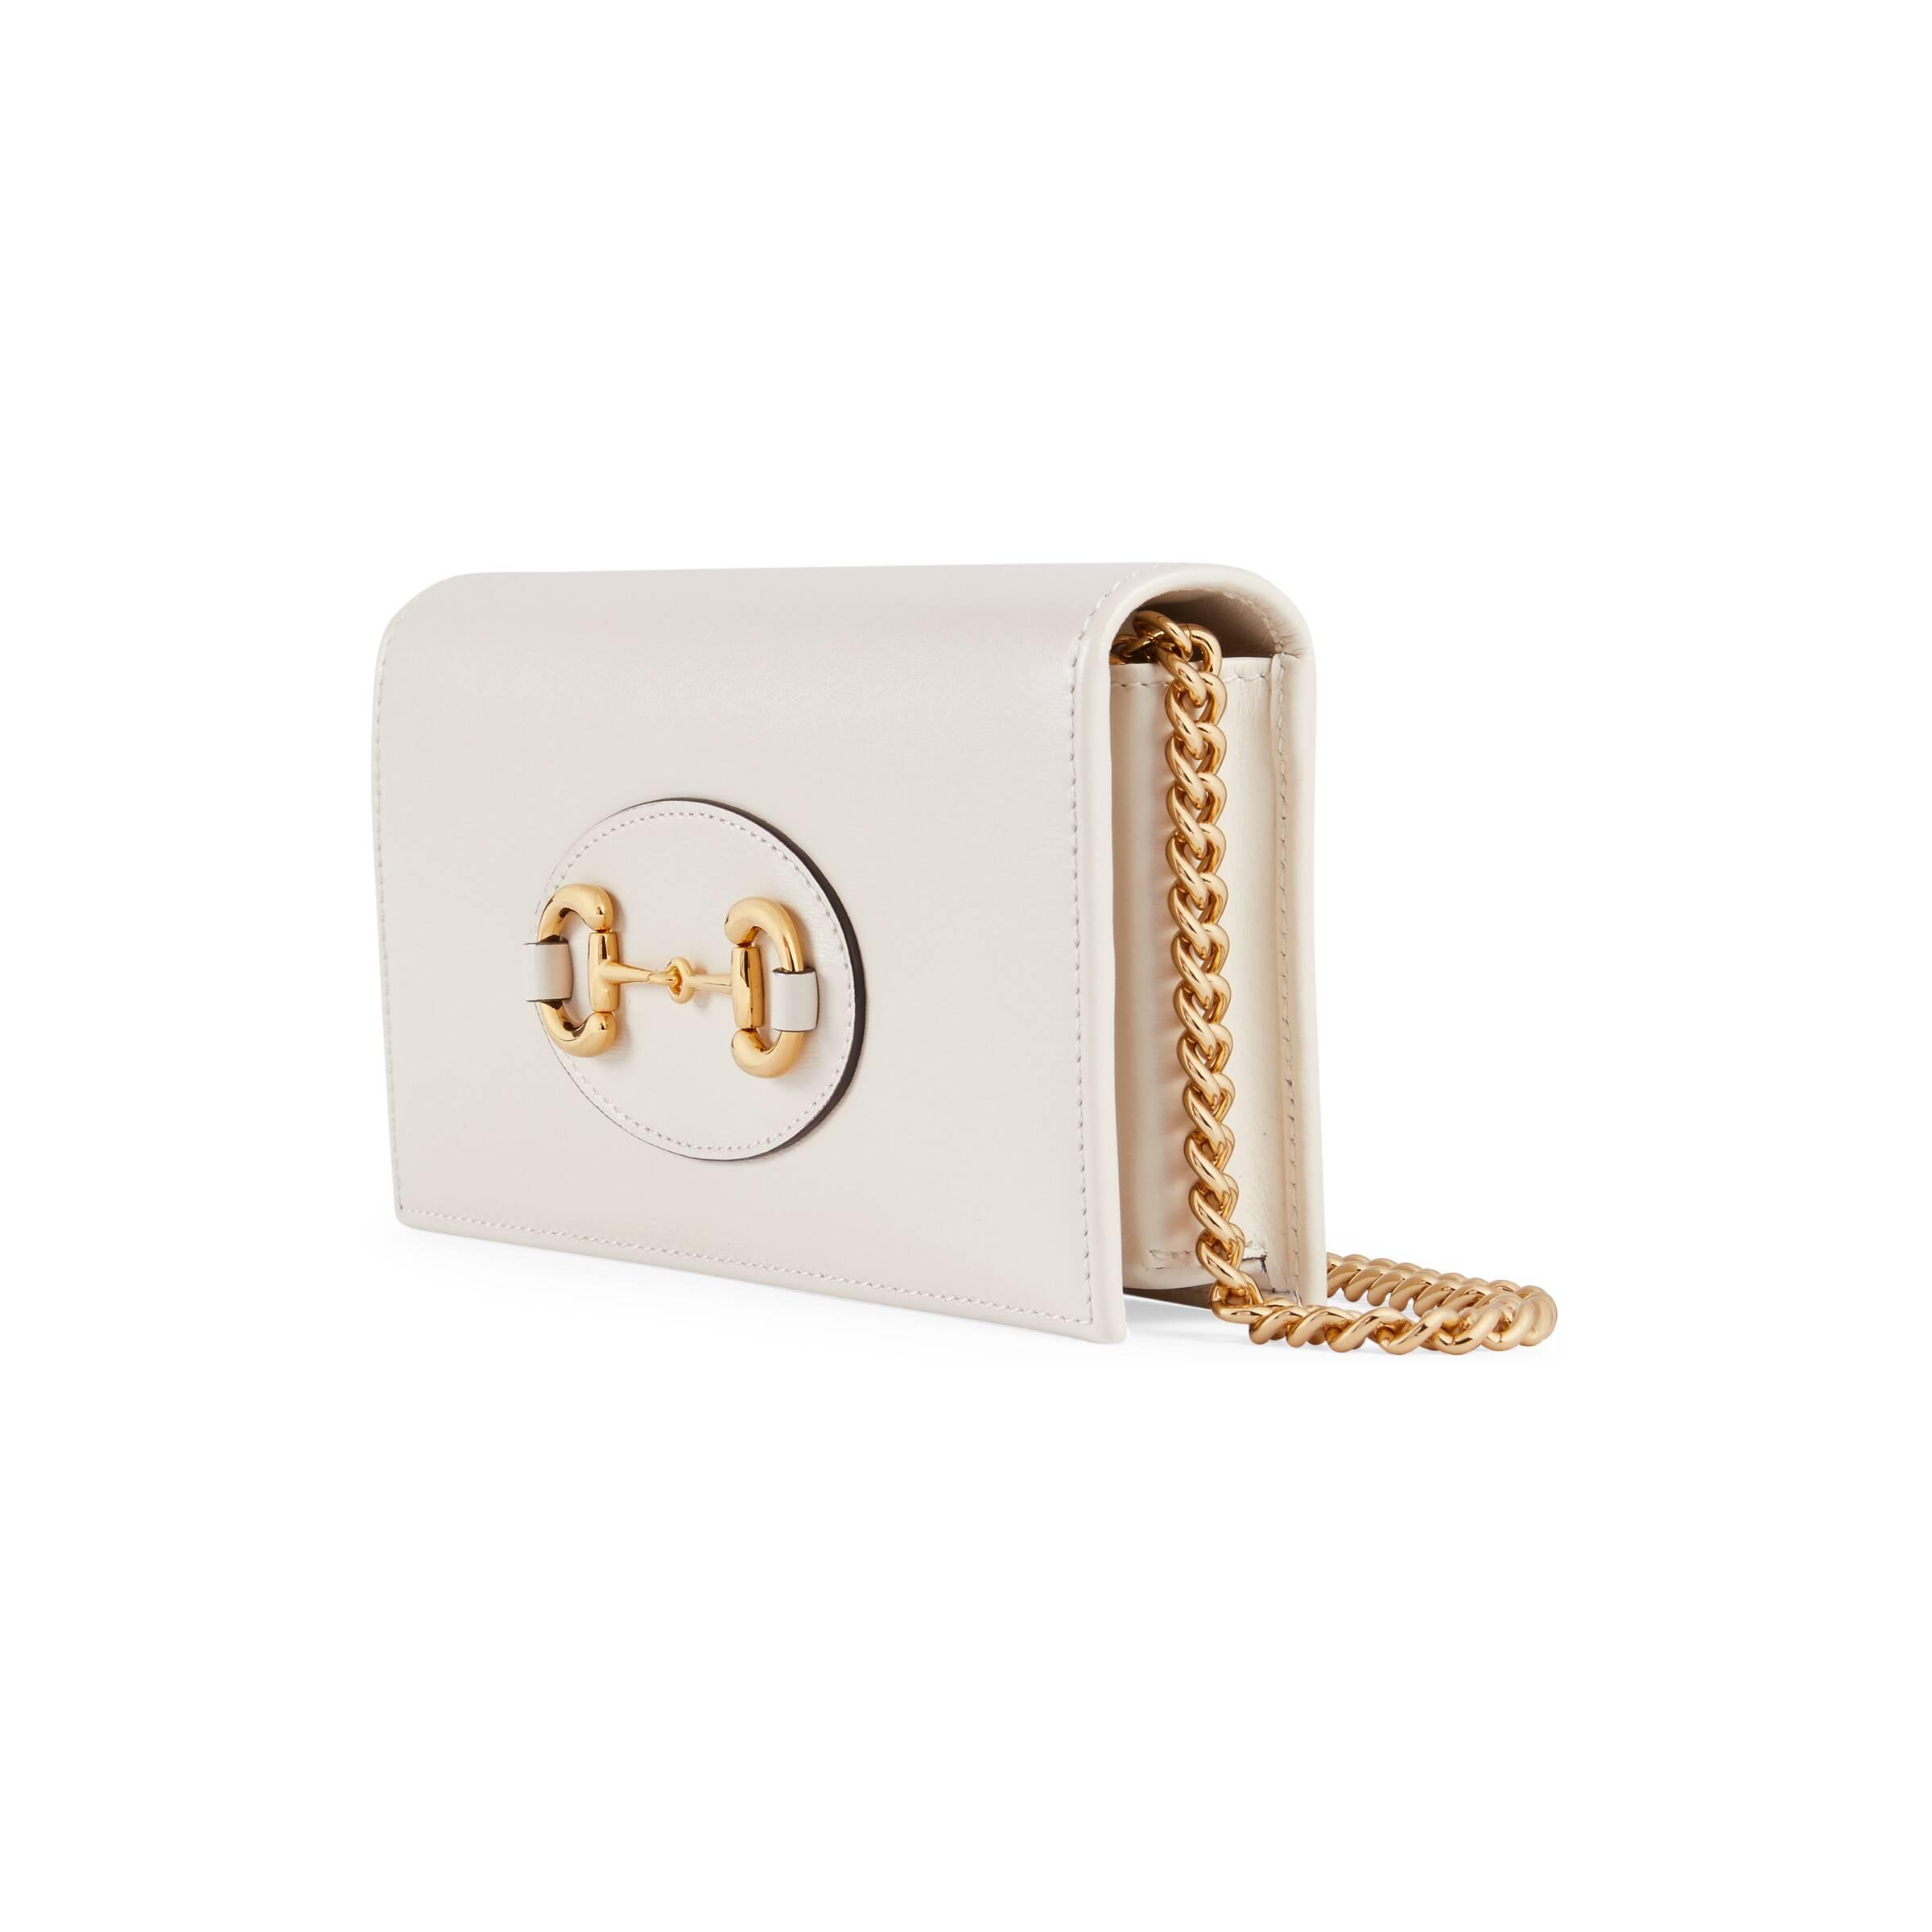 Gucci Horsebit 1955 Wallet With Chain in White - Lyst